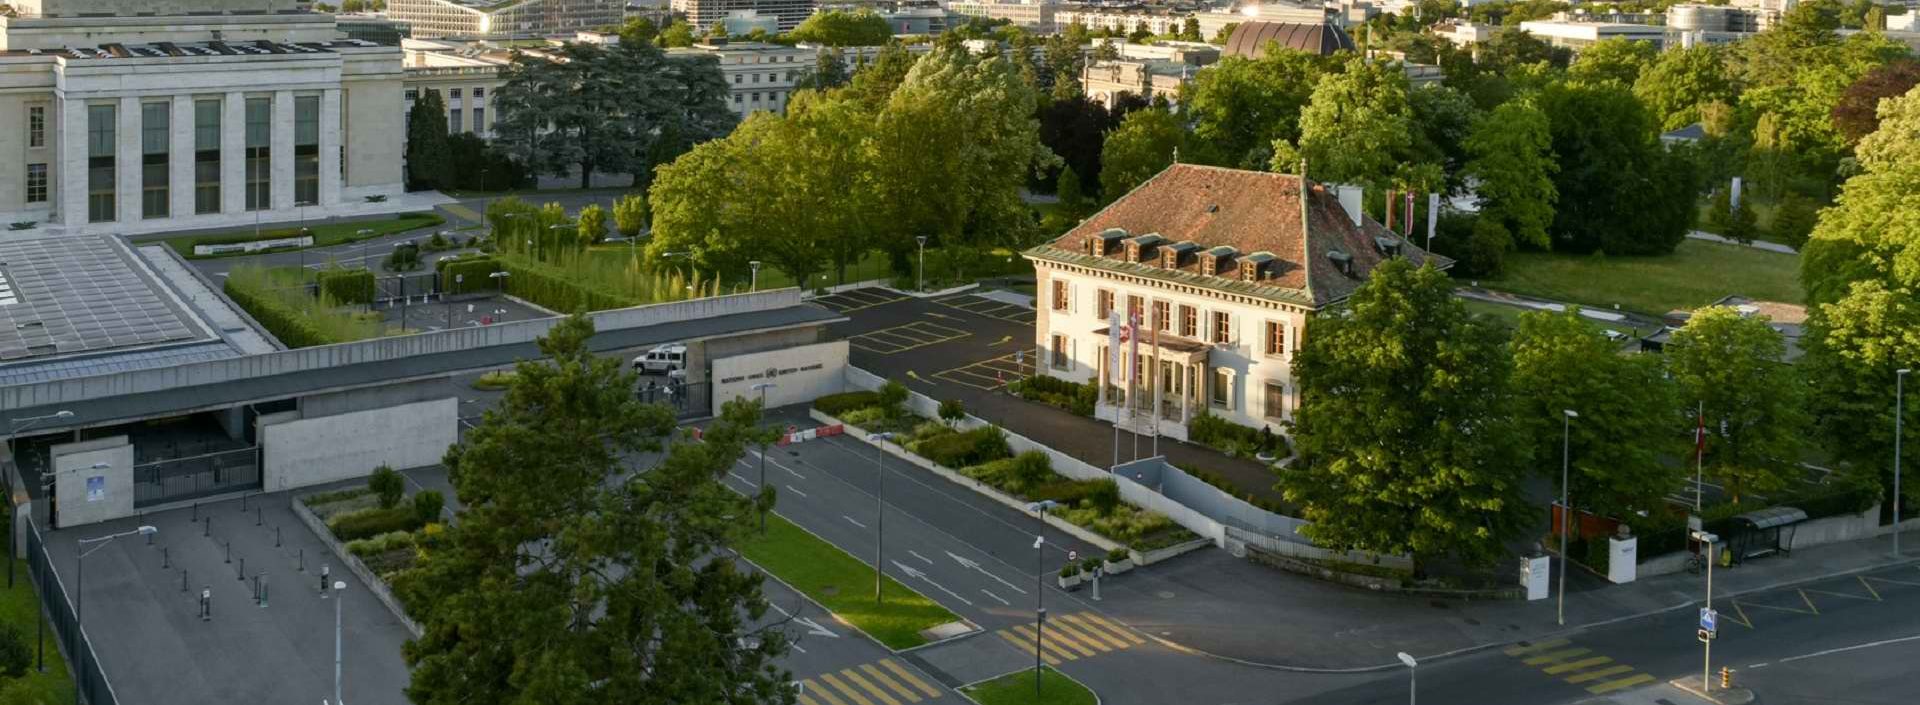 The history of a swiss hotel school - The history of a swiss hospitality school -